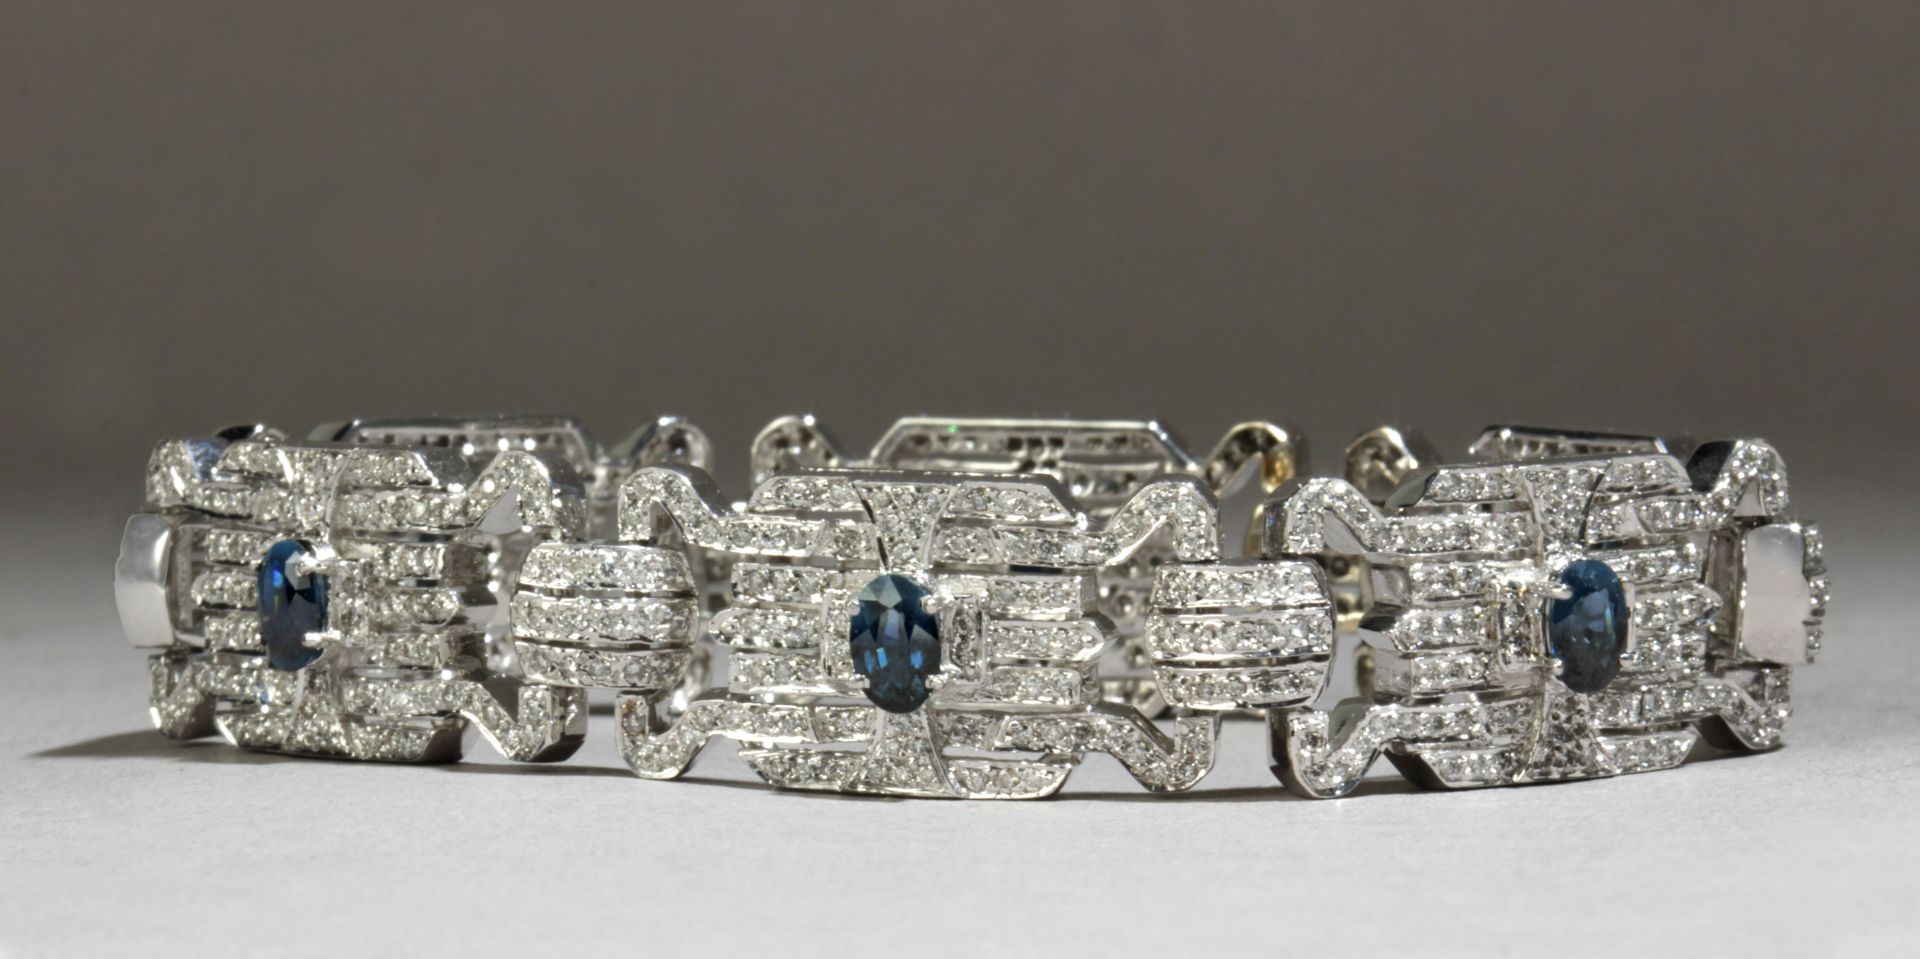 An Art-Déco style bracelet with a geometric pattern in 18k. white gold, sapphires and diamonds